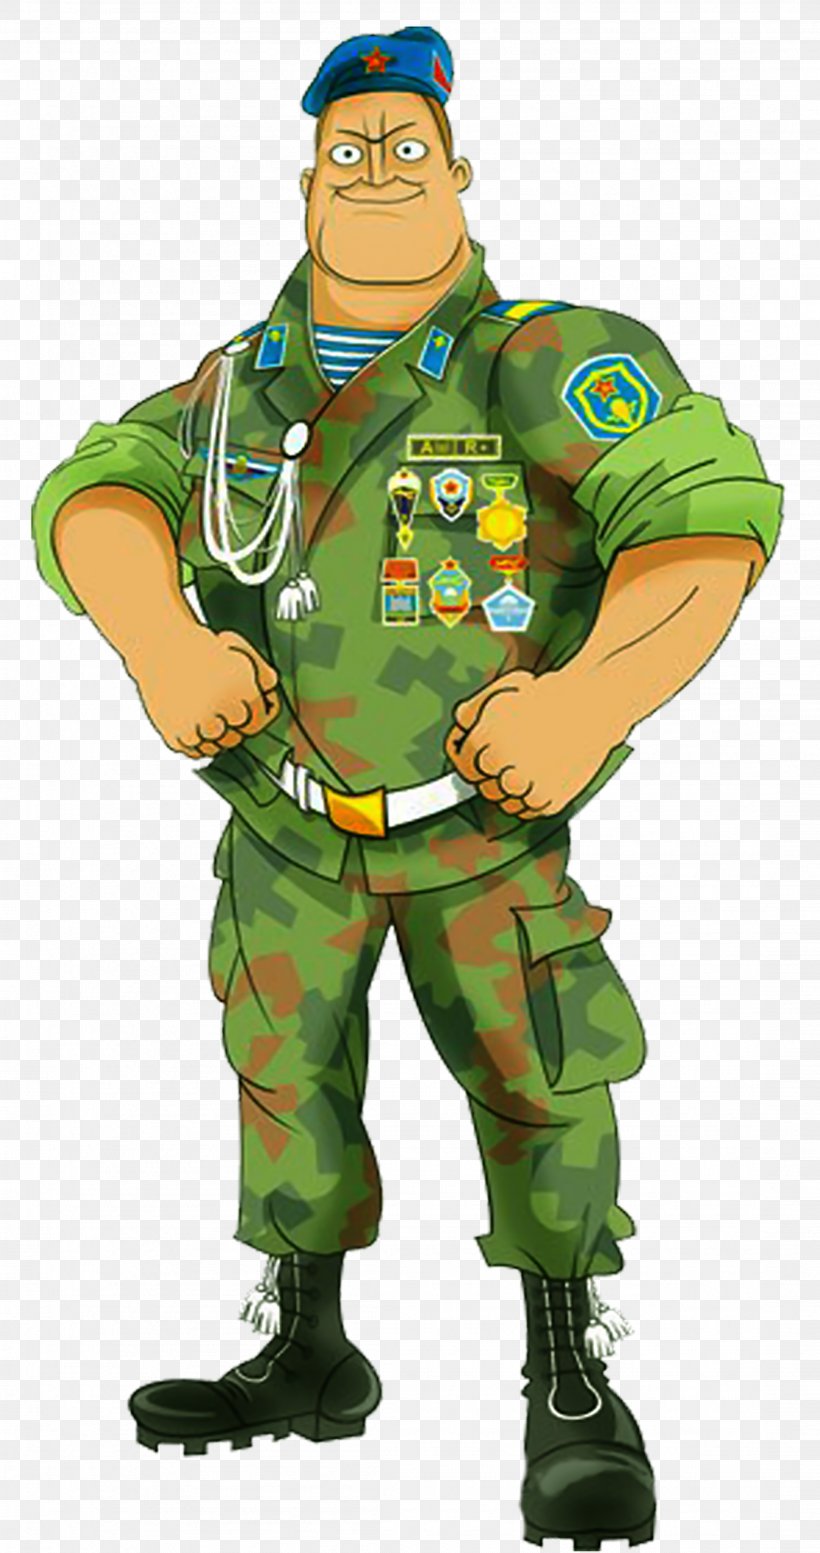 Defender Of The Fatherland Day Holiday 23 February, PNG, 2199x4166px, 23 February, Defender Of The Fatherland Day, Cartoon, Fatherland, Fictional Character Download Free